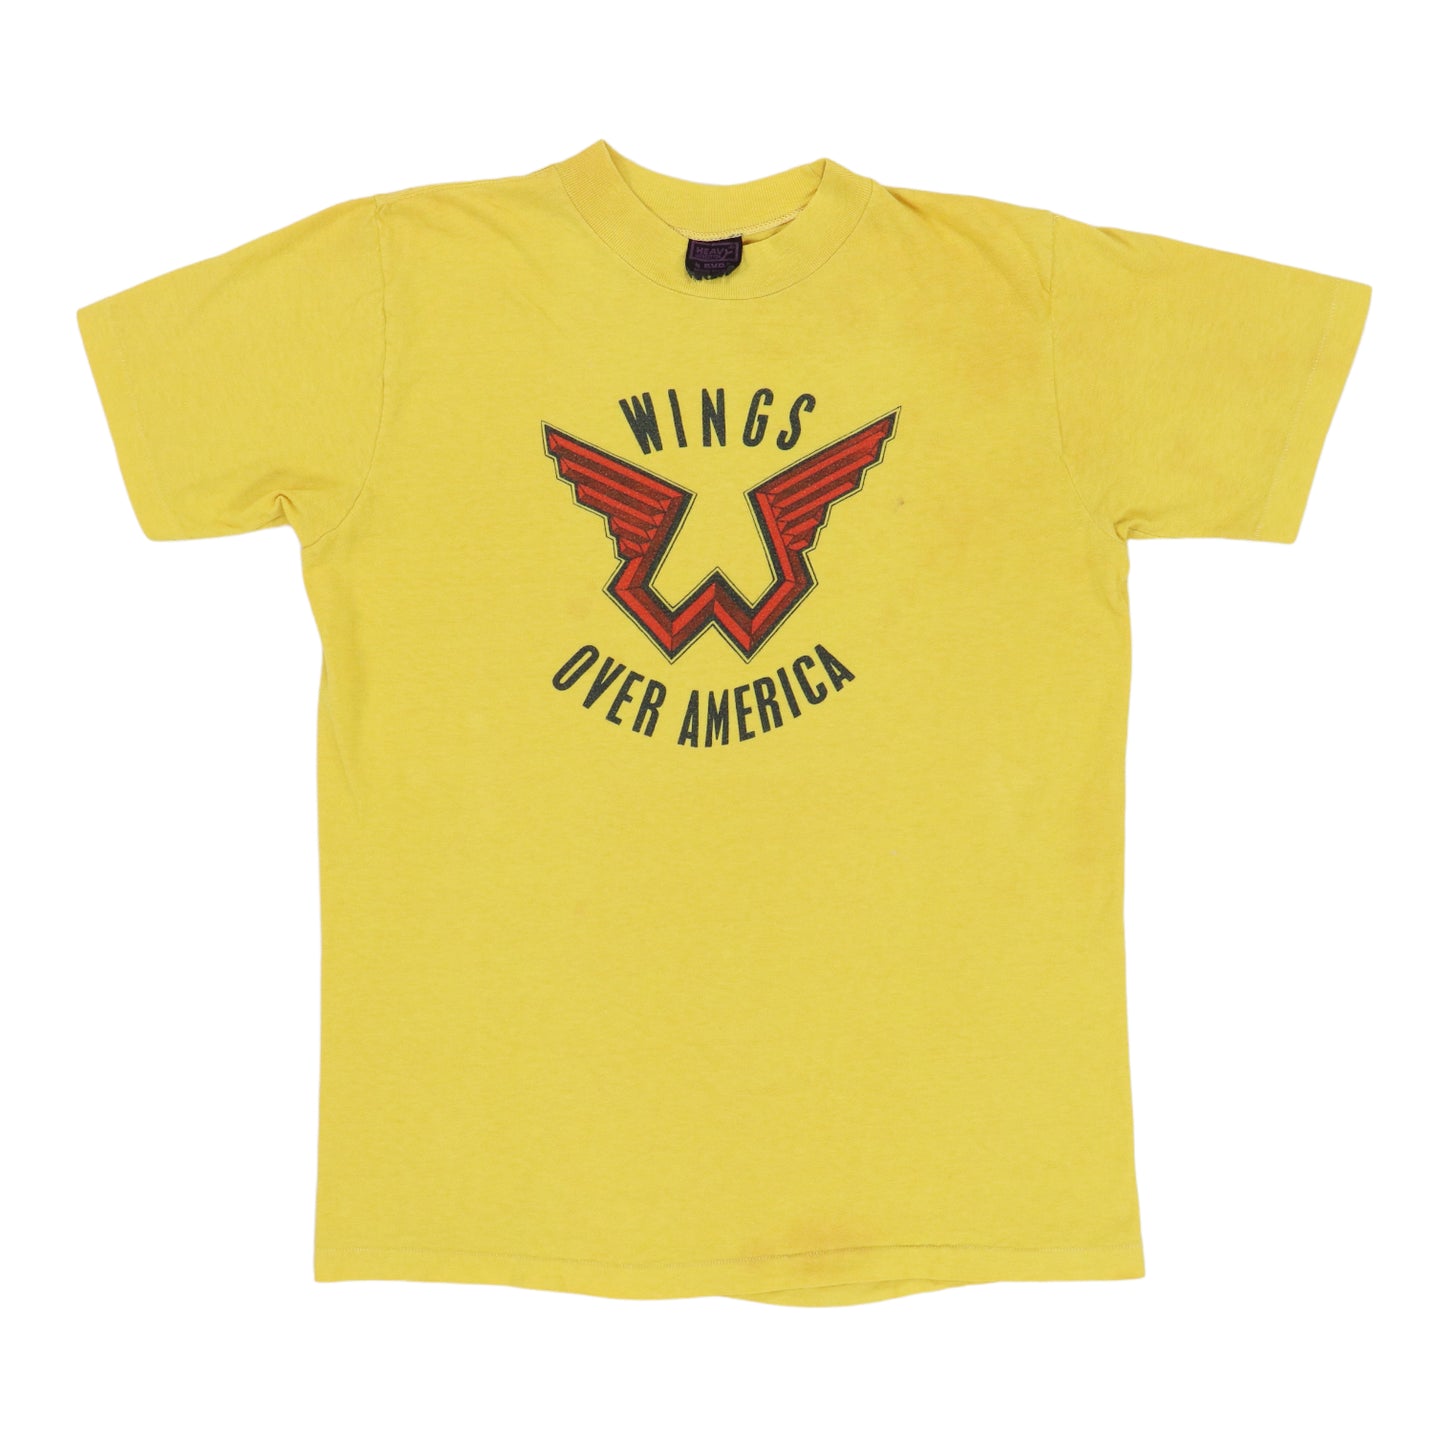 1976 Wings Over America Promo Shirt